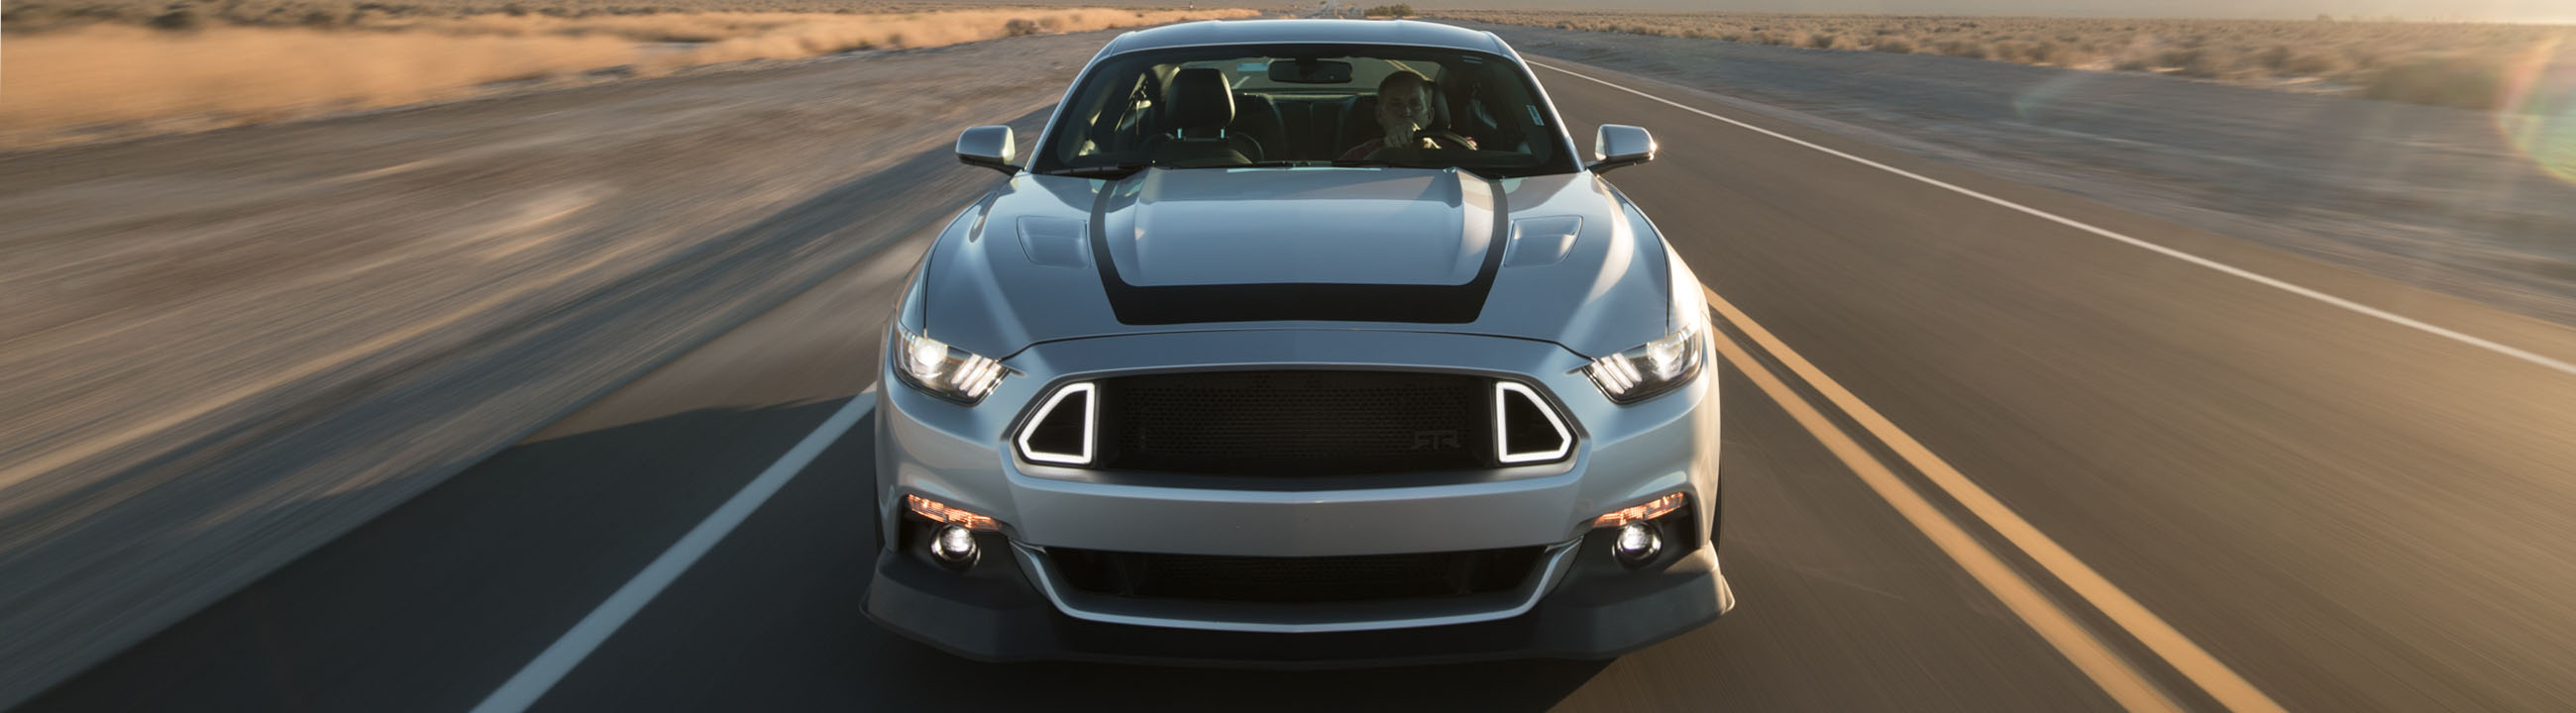 2016 Mustang RTR driving down highway